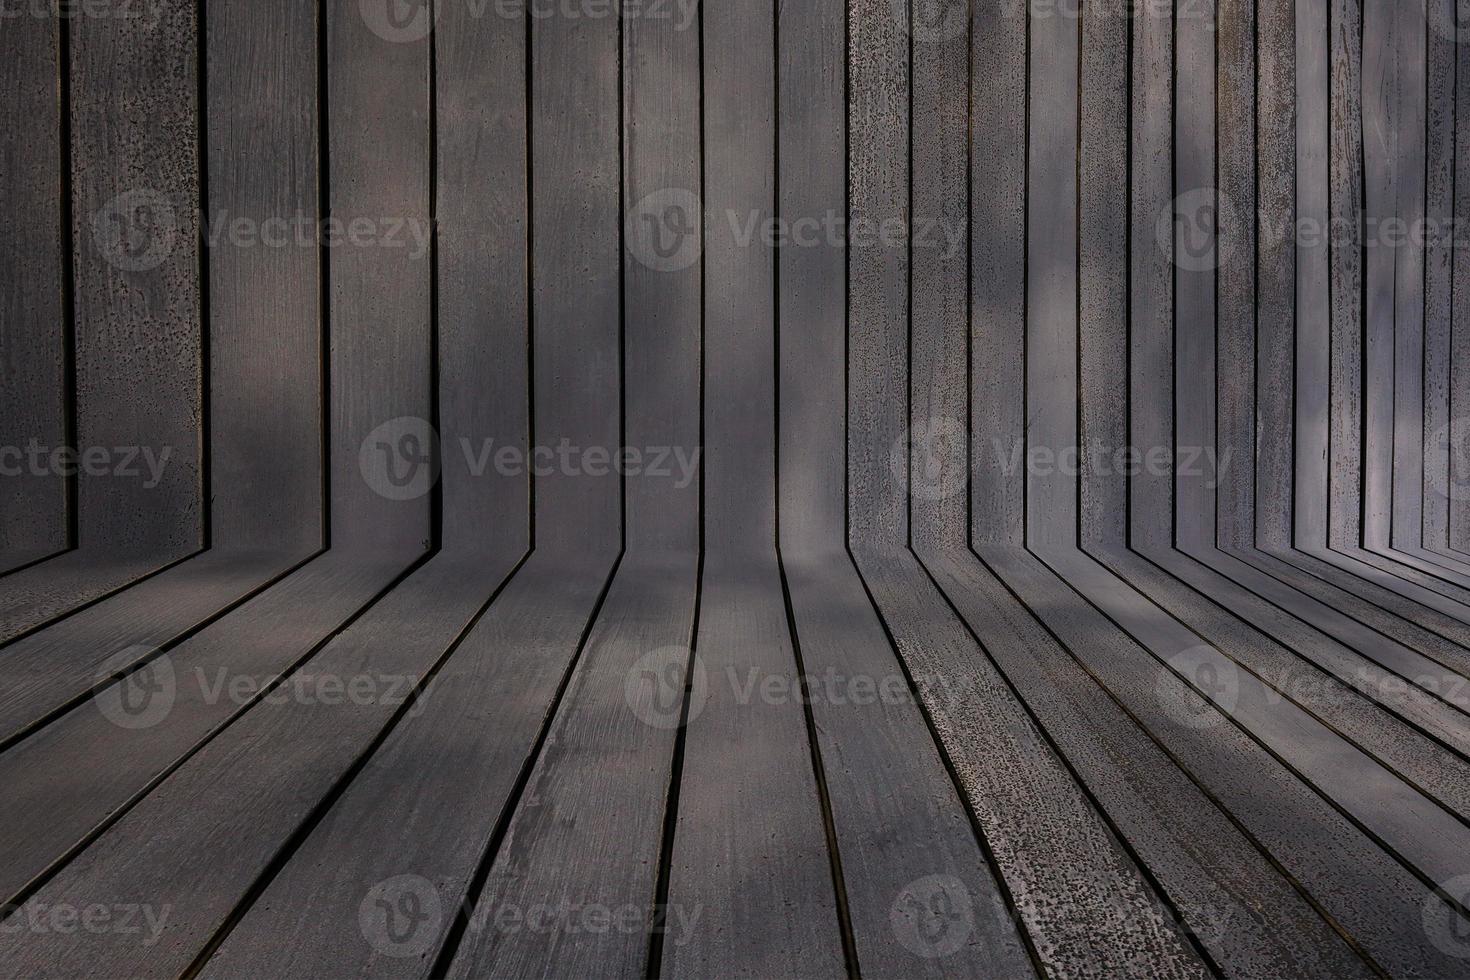 Wood texture background,Vintage wooden wall in perspective view, grunge background photo